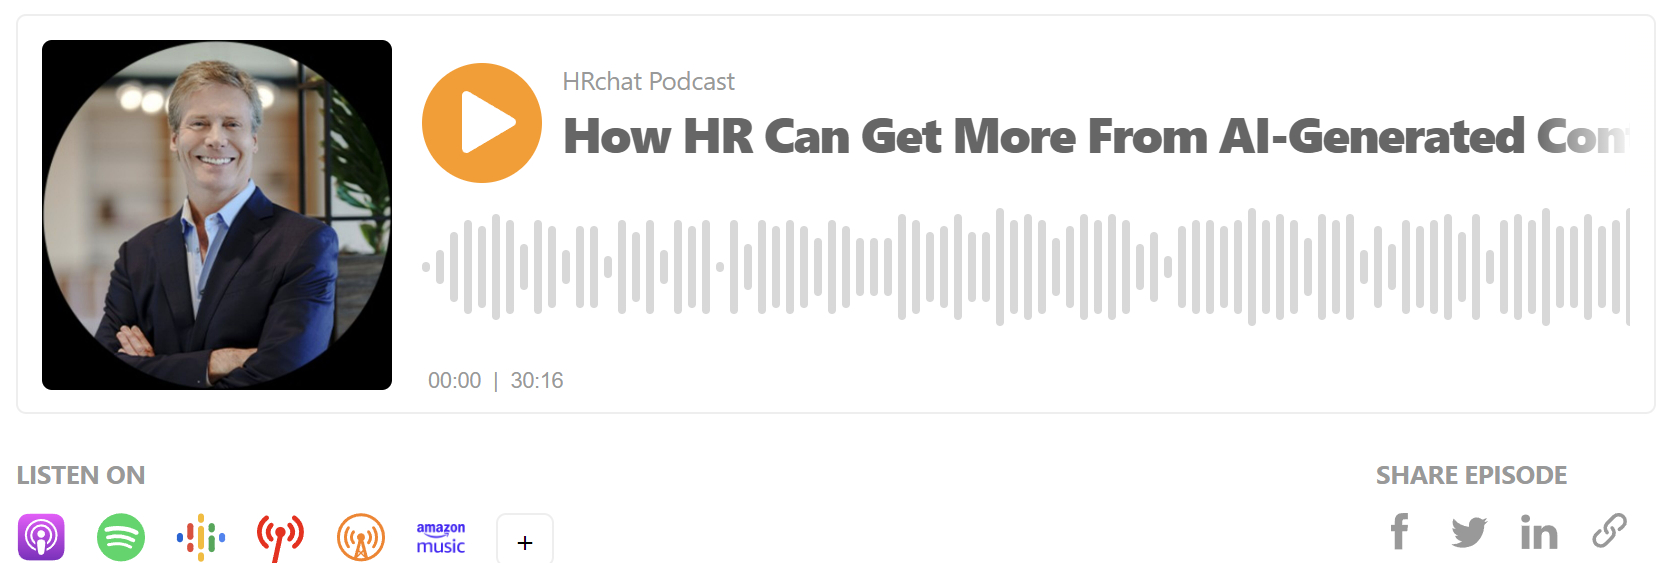 HRchat Podcast with Graham Glass